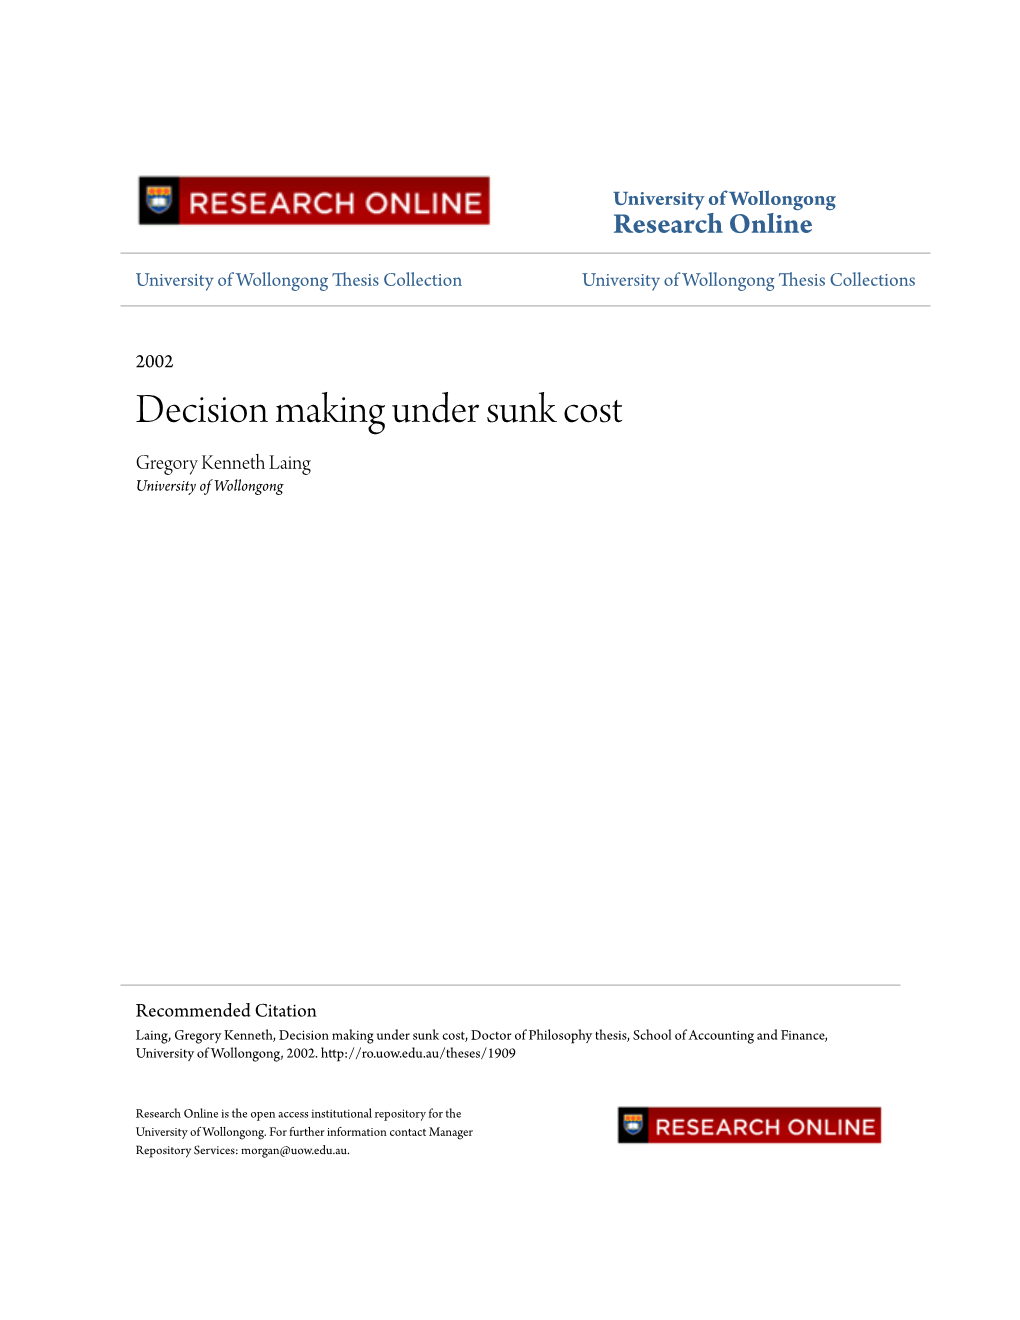 Decision Making Under Sunk Cost Gregory Kenneth Laing University of Wollongong